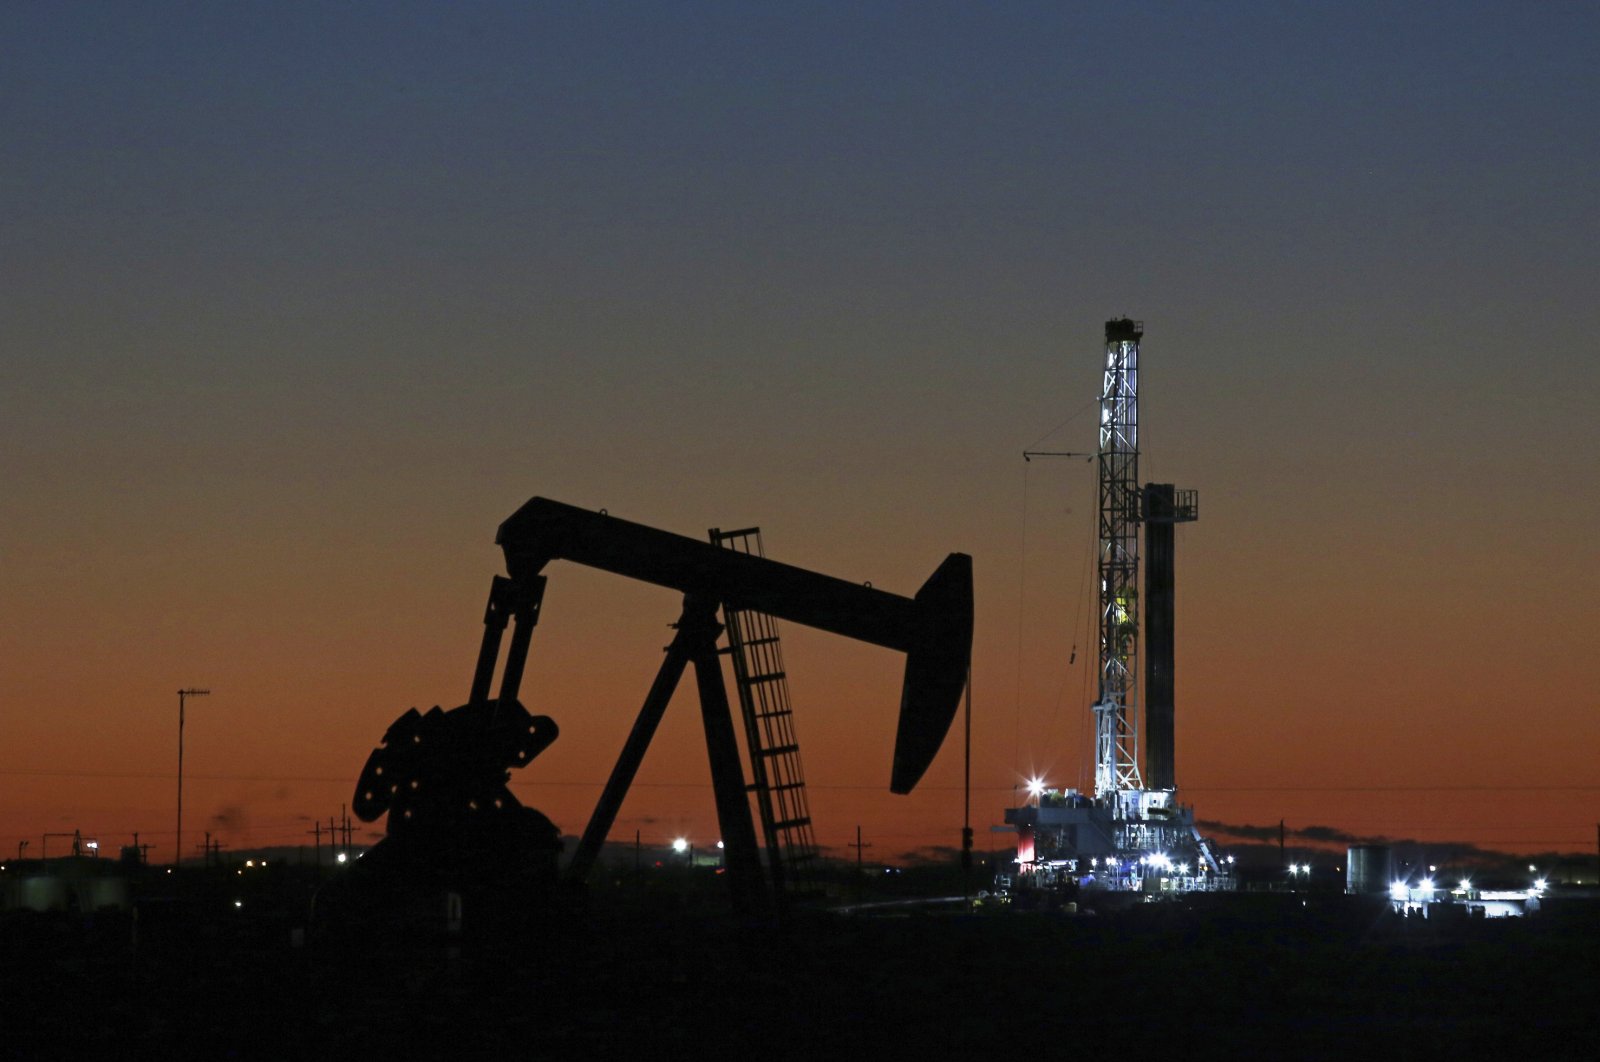 This file photo shows an oil rig and pump jack in Midland, Texas, Oct. 9, 2018. (AP Photo)